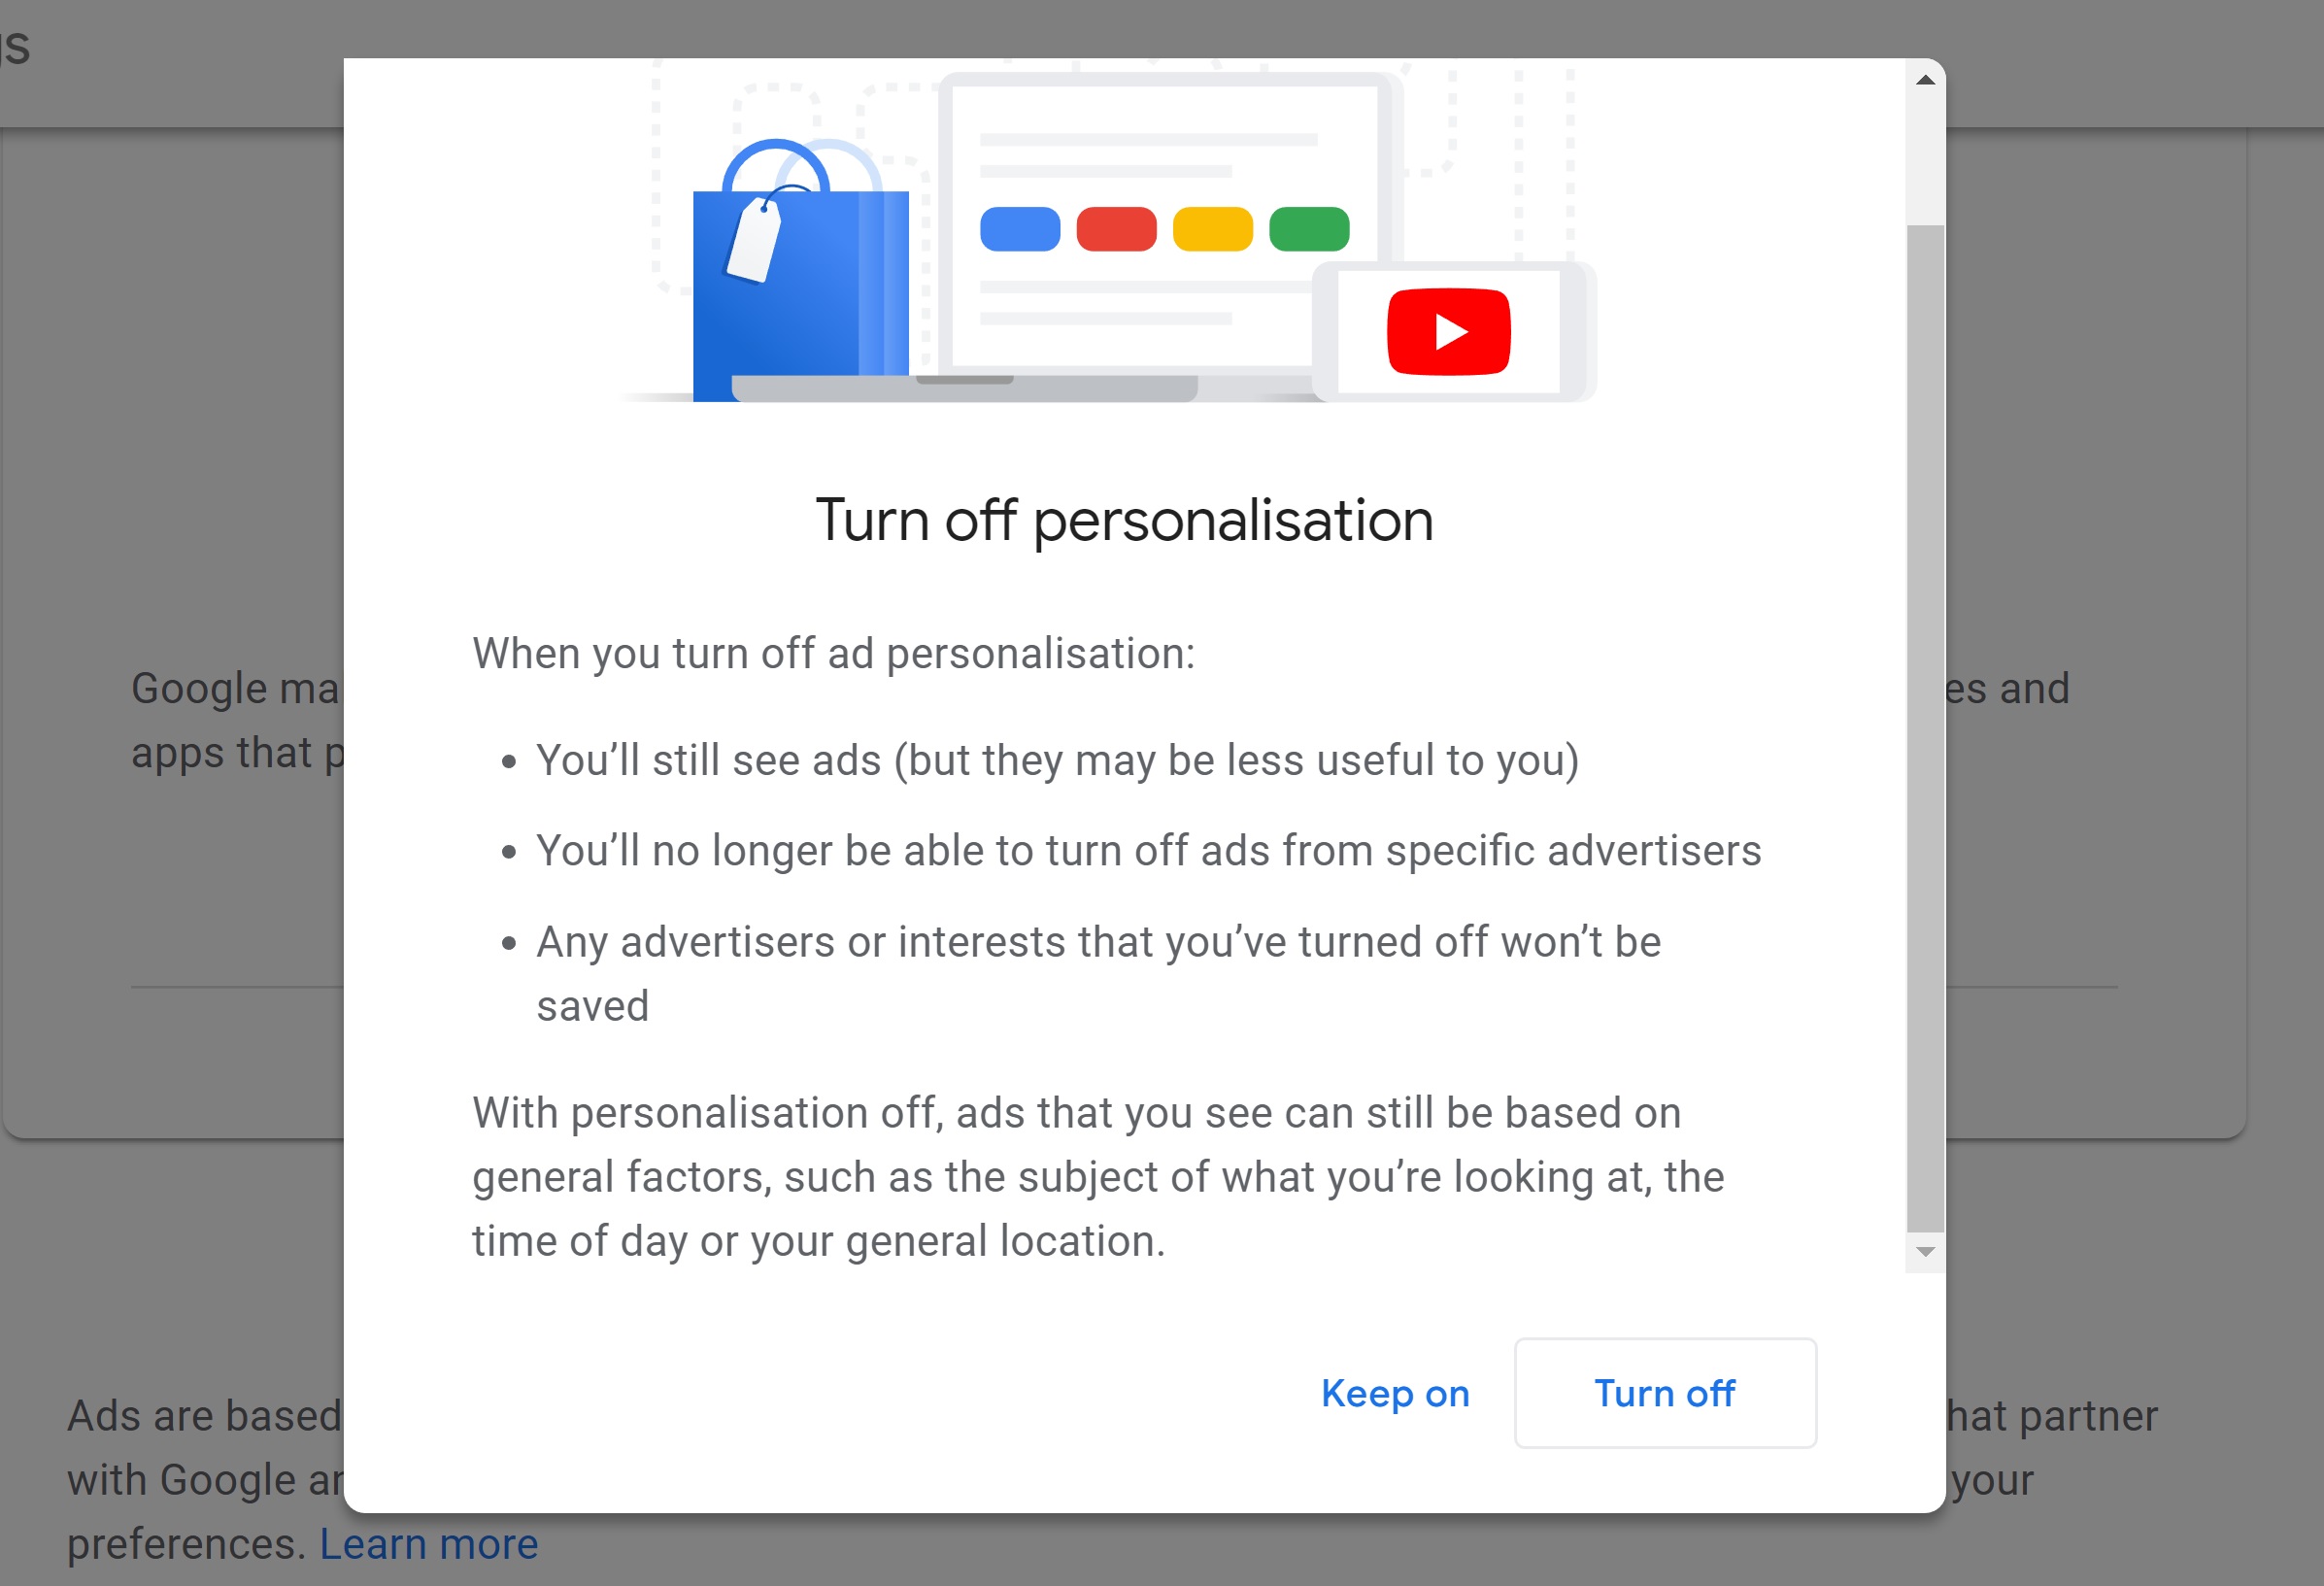 How to control the ads you see with Google's new personalization settings